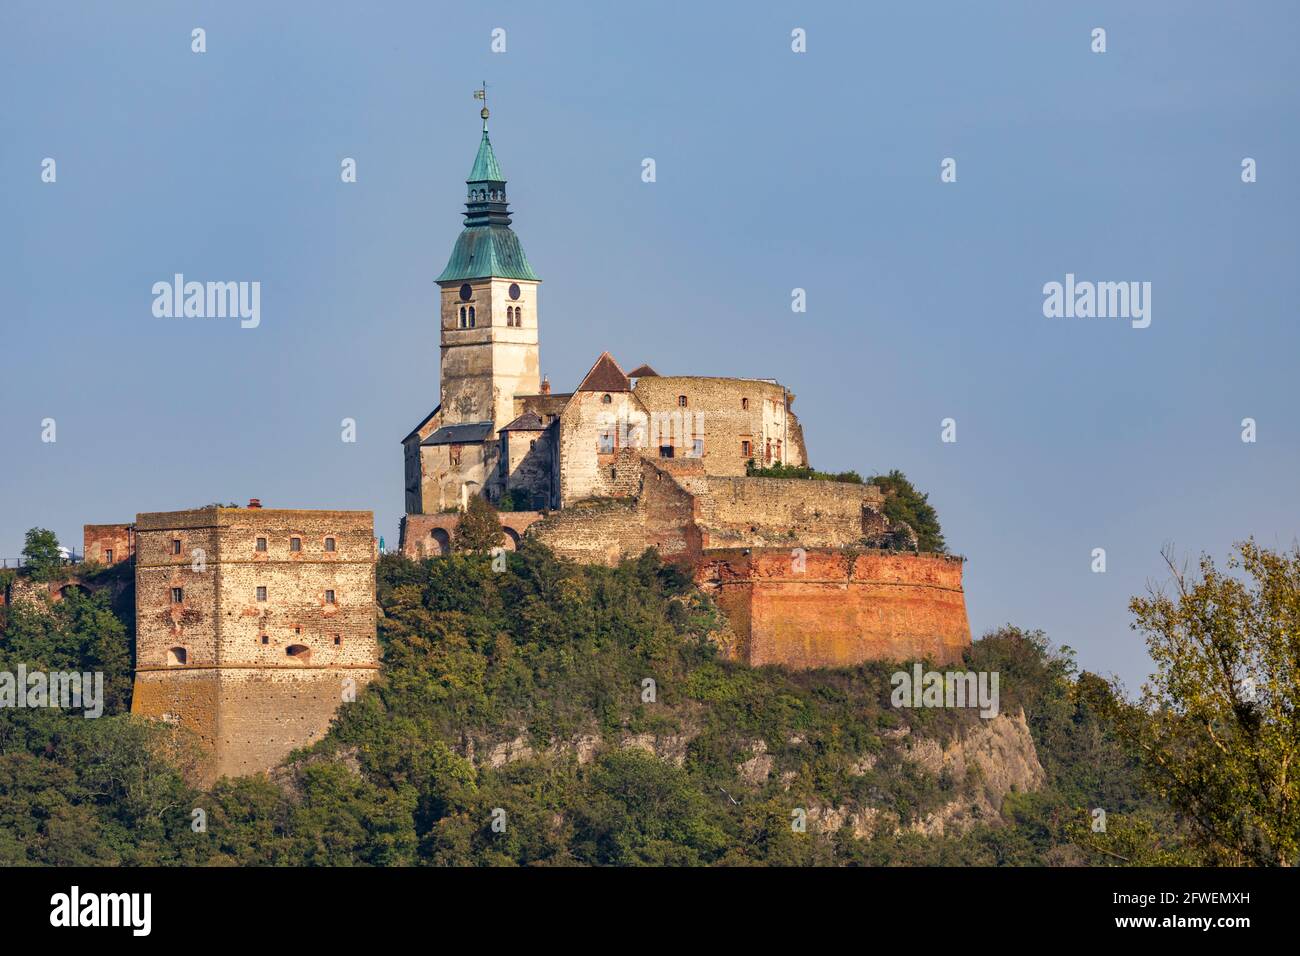 Gussing castle, Southern Burgenland, Austria Stock Photo